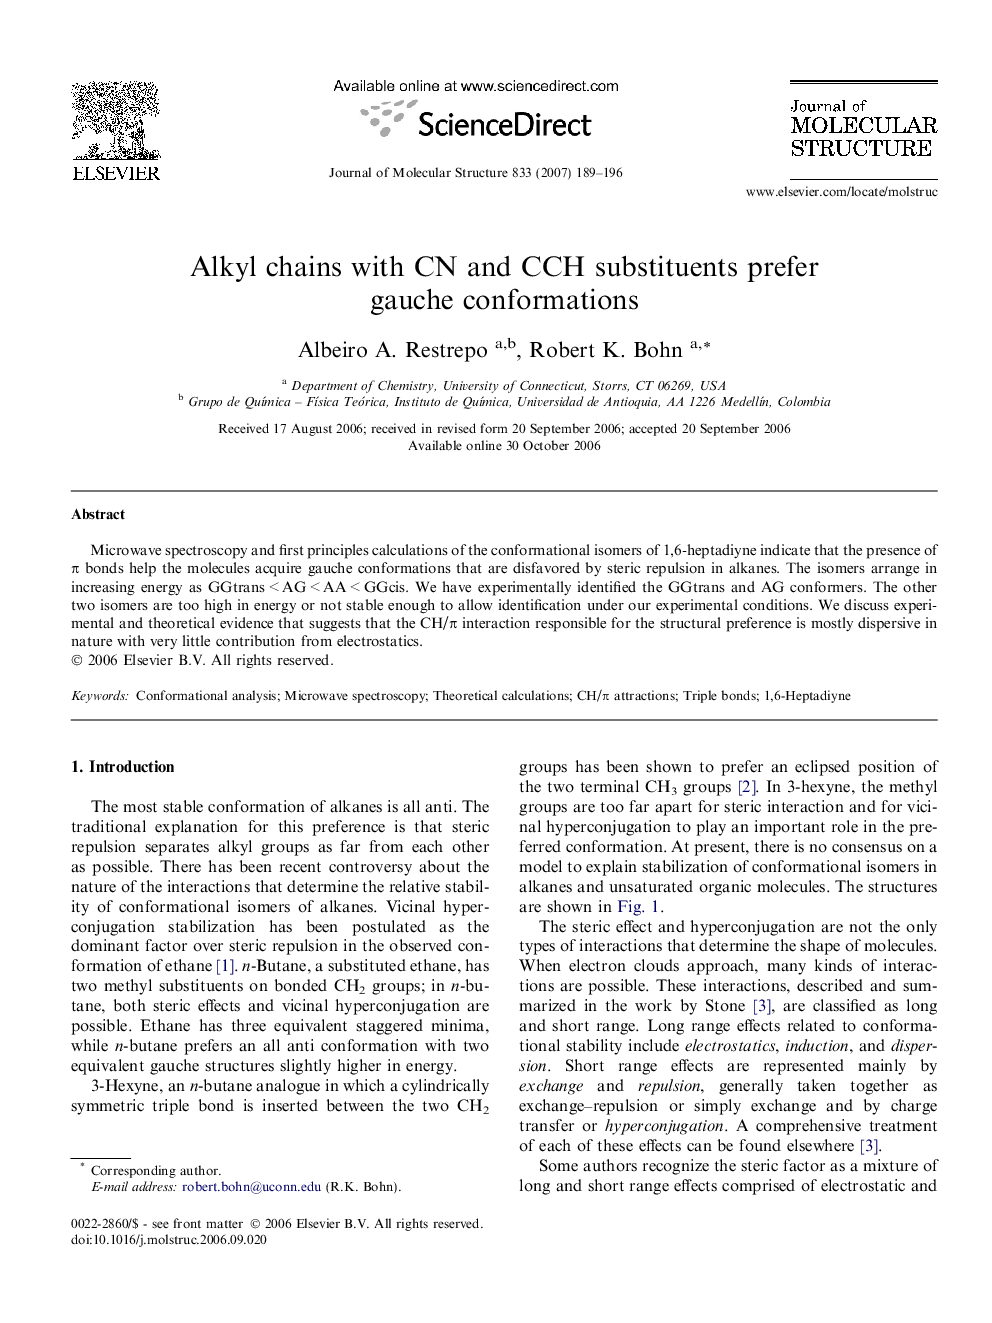 Alkyl chains with CN and CCH substituents prefer gauche conformations